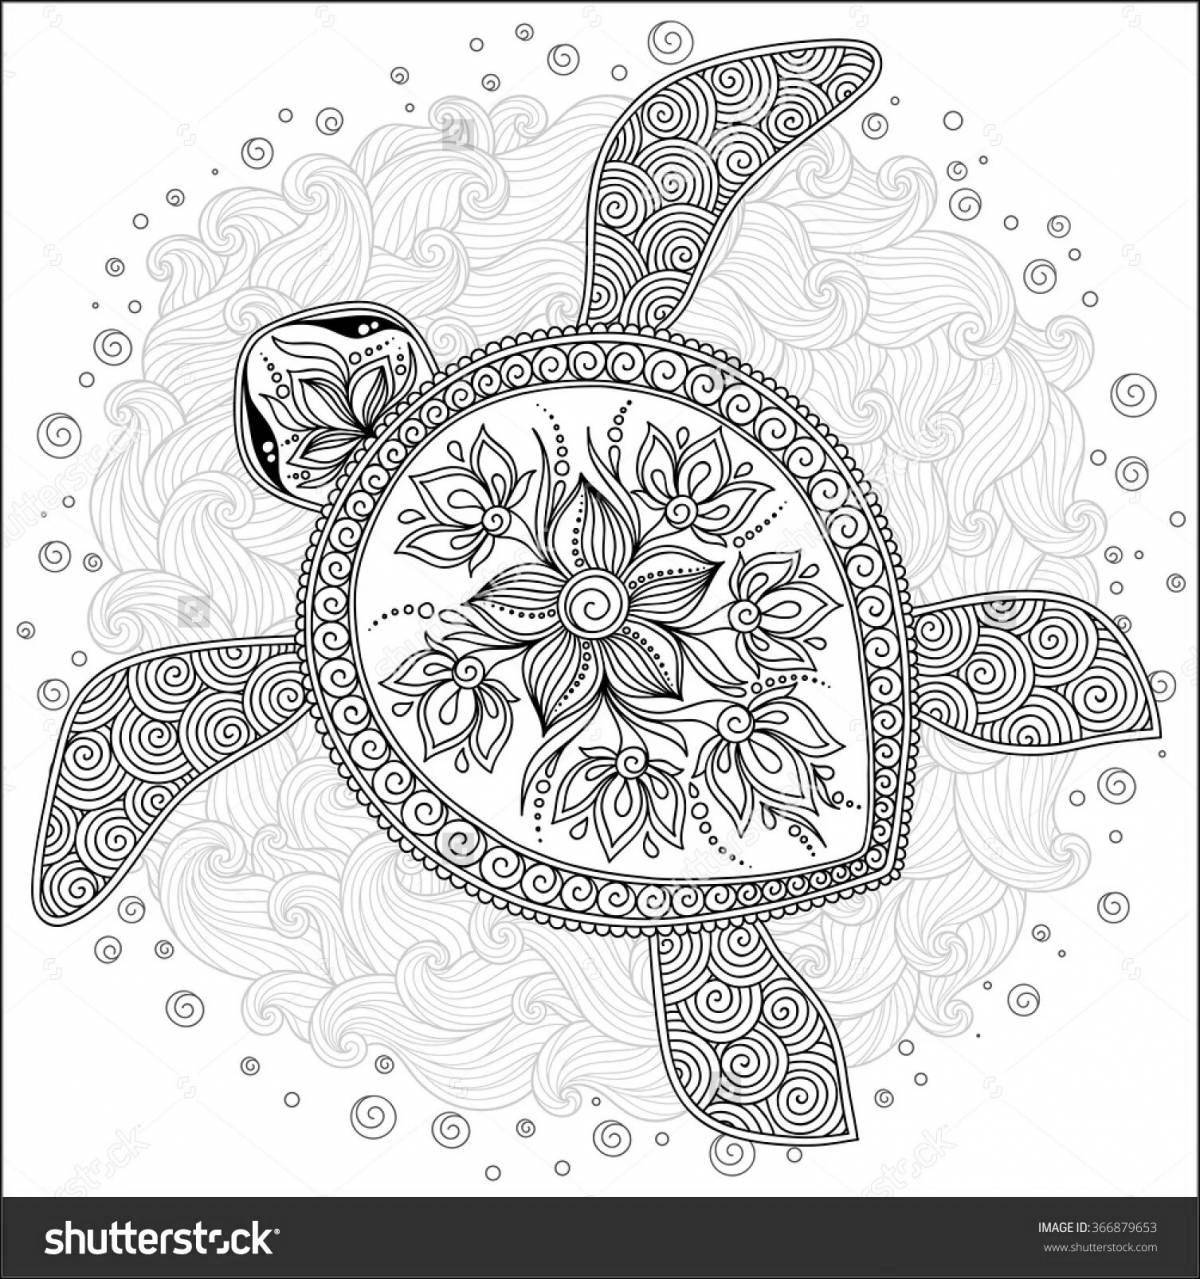 Colorful anti-stress turtle coloring book